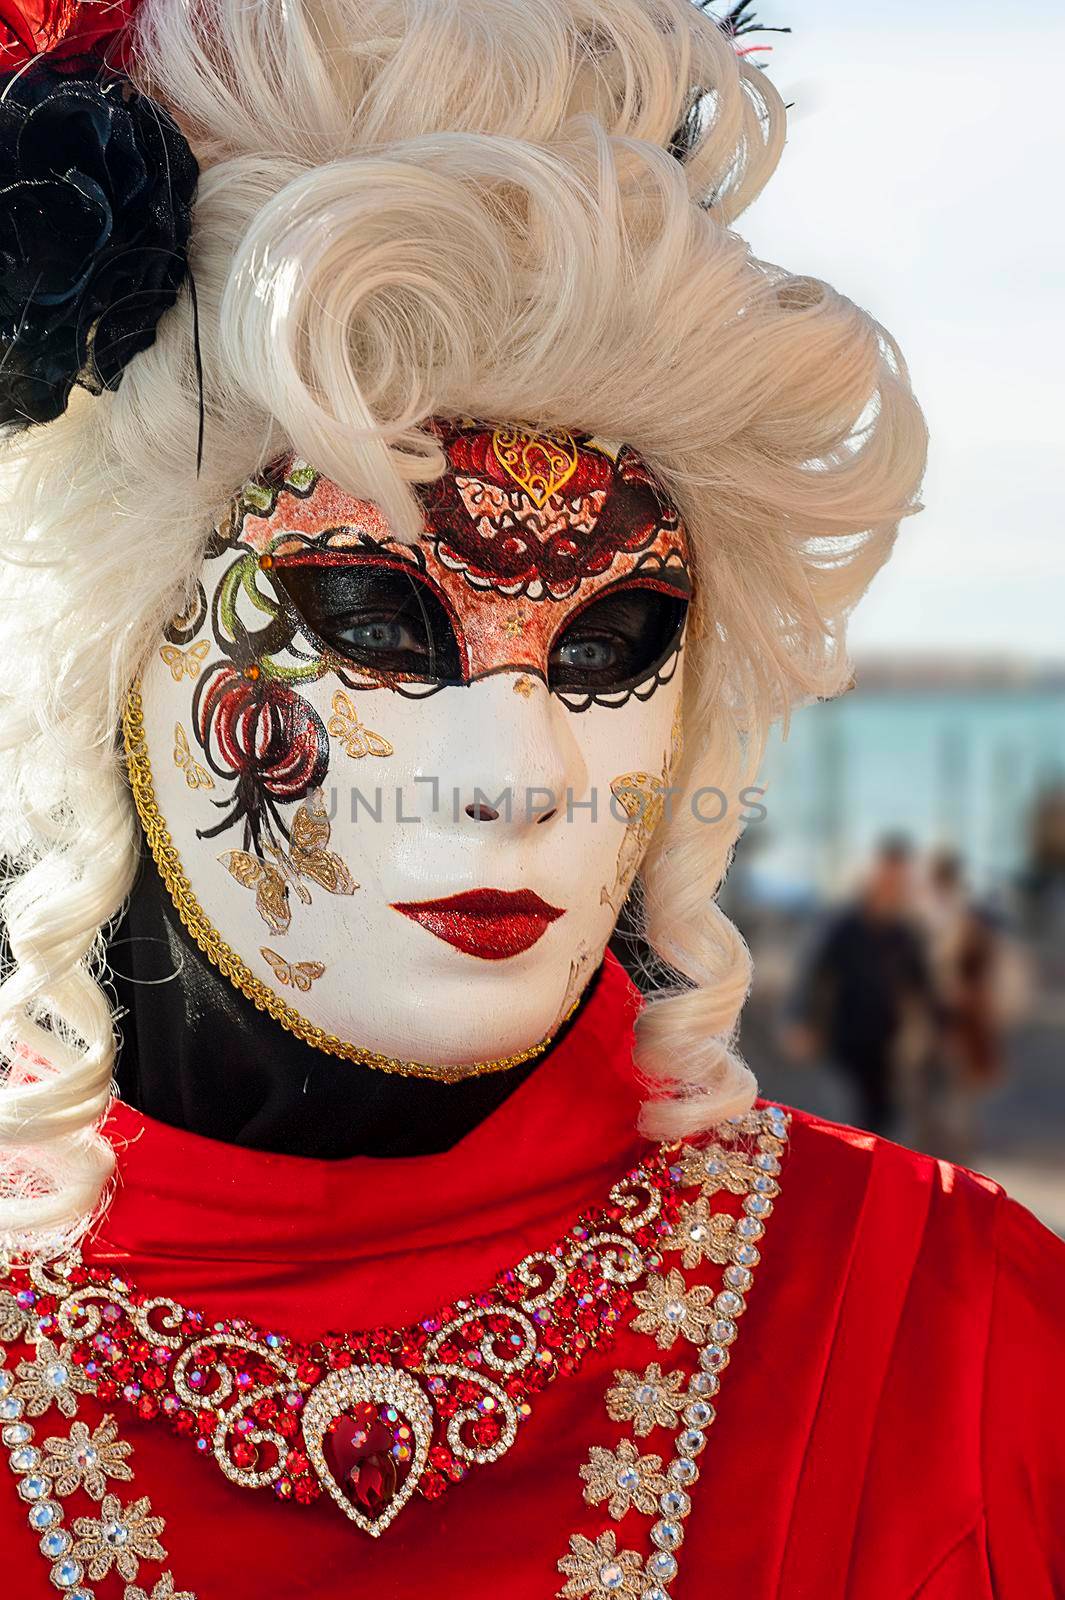 venice carnival 2018 by Giamplume